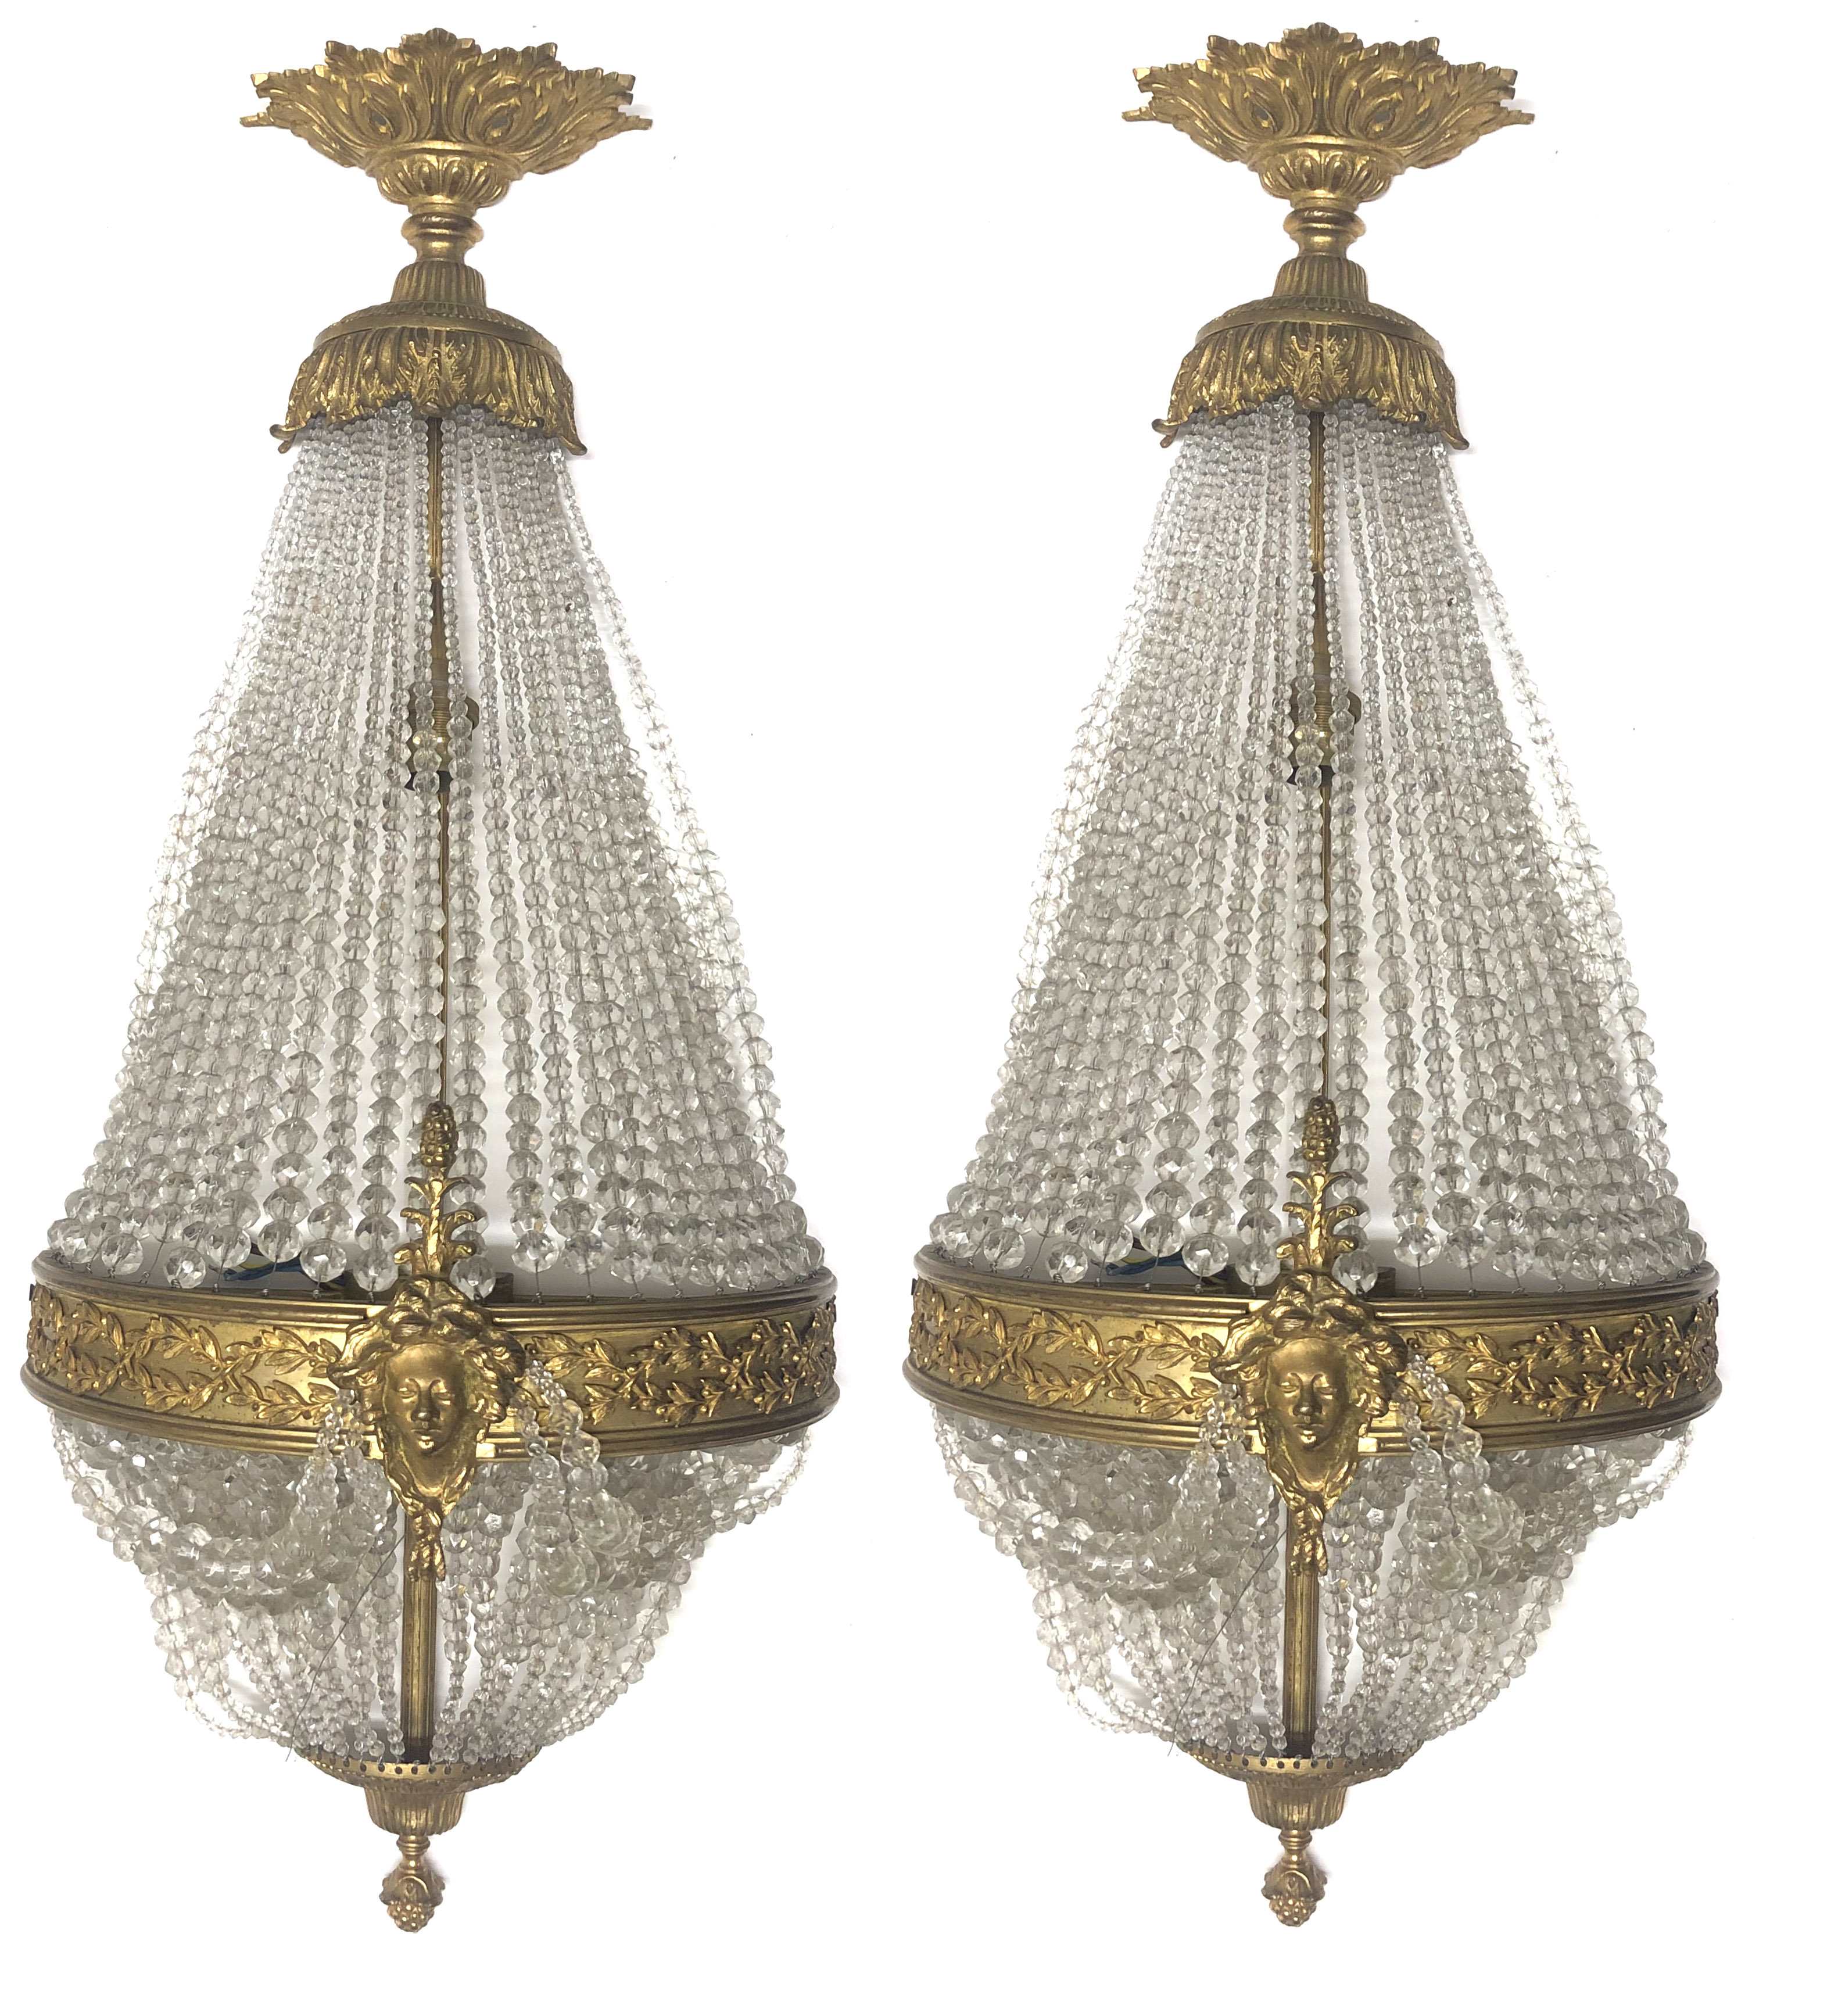 A PAIR OF VENETIAN STYLE BRONZE BASKET WALL LIGHTS With beaded glass shades, the lower with